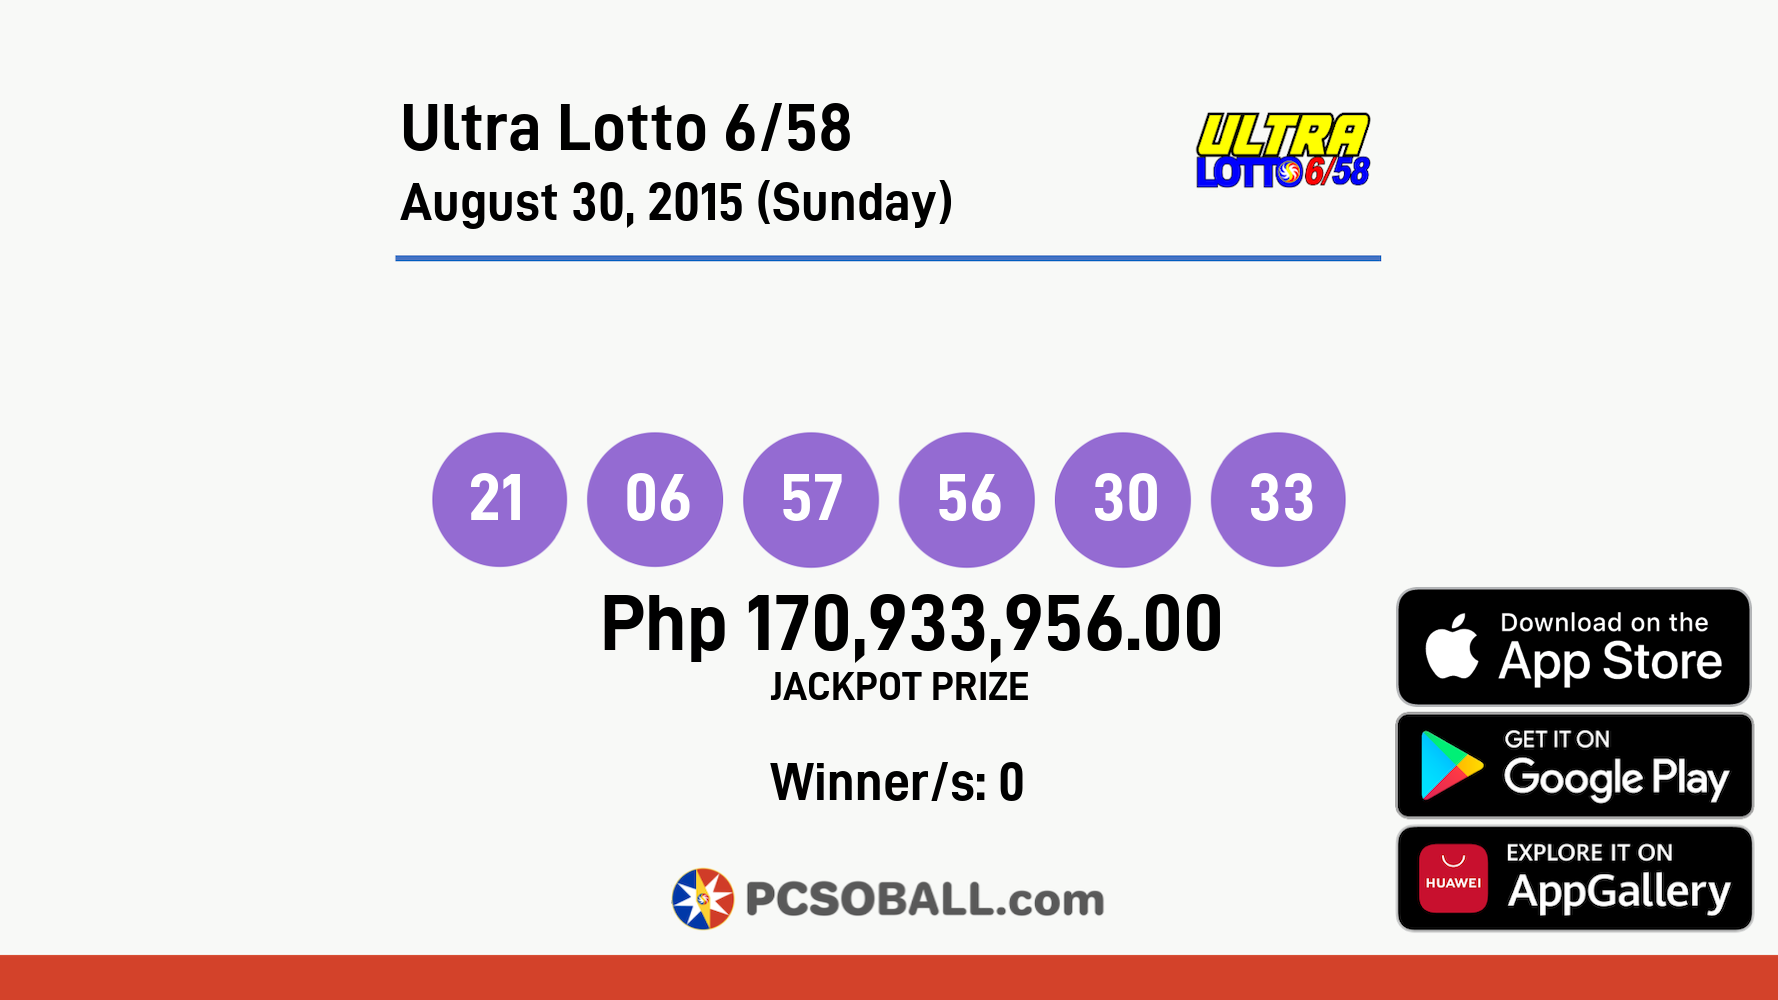 Ultra Lotto 6/58 August 30, 2015 (Sunday) Result